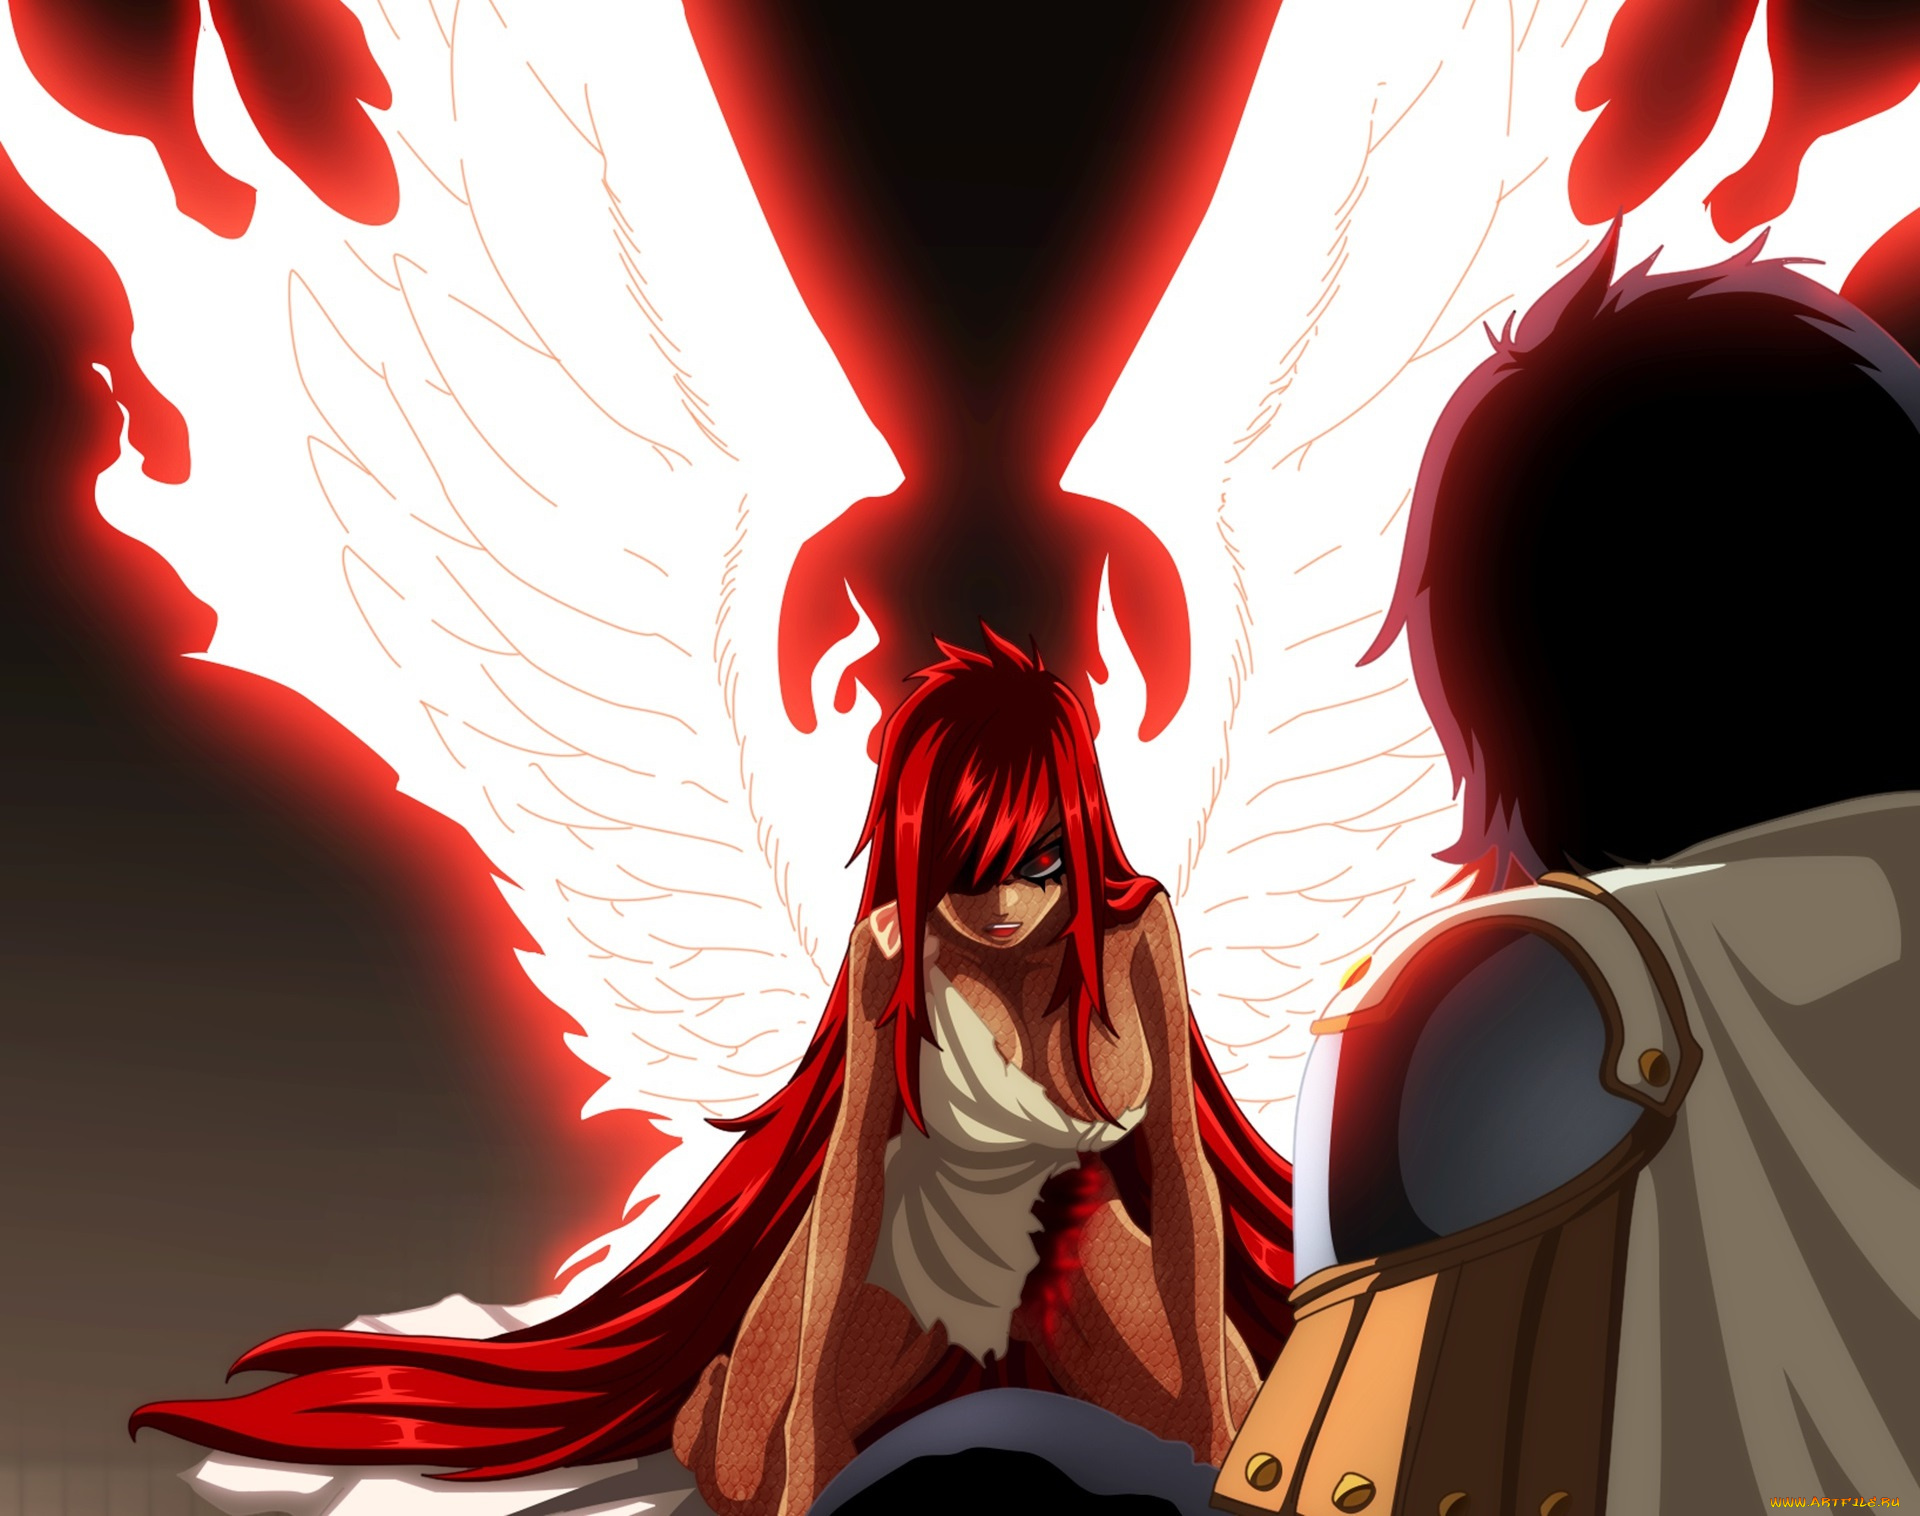 аниме, fairy, tail, dress, girl, manga, red, redhead, man, pretty, by, animefanno1, strong, eyes, wings, anime, oppai, fairy, tail, hair, game